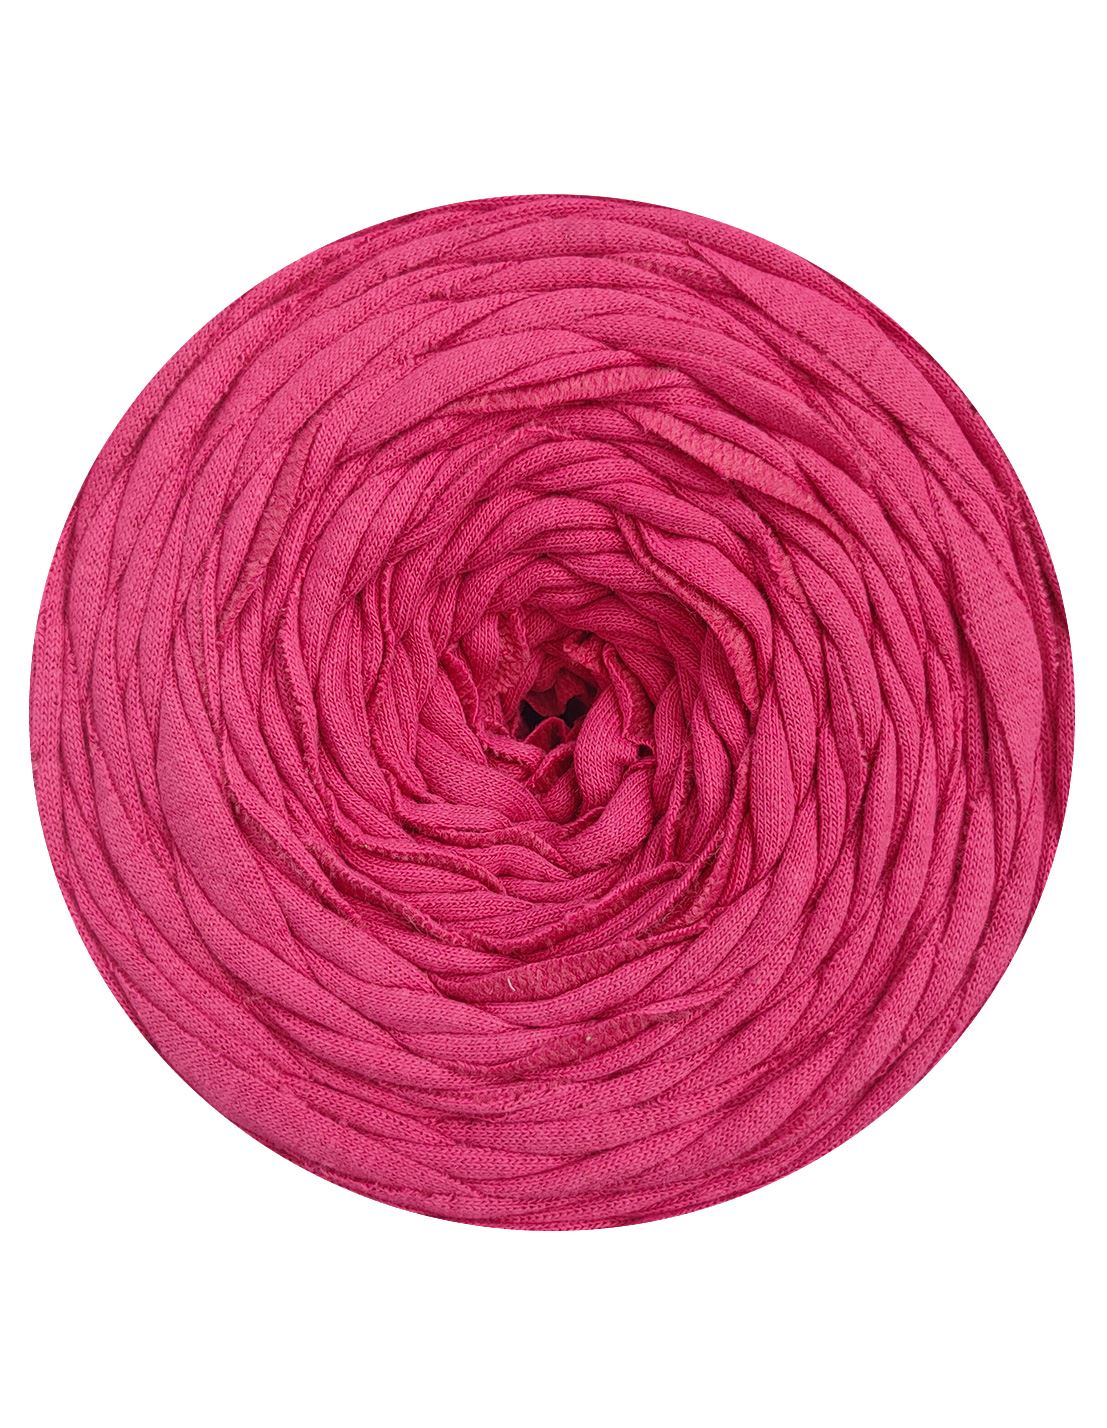 French rose pink t-shirt yarn by Rescue Yarn (100-120m)